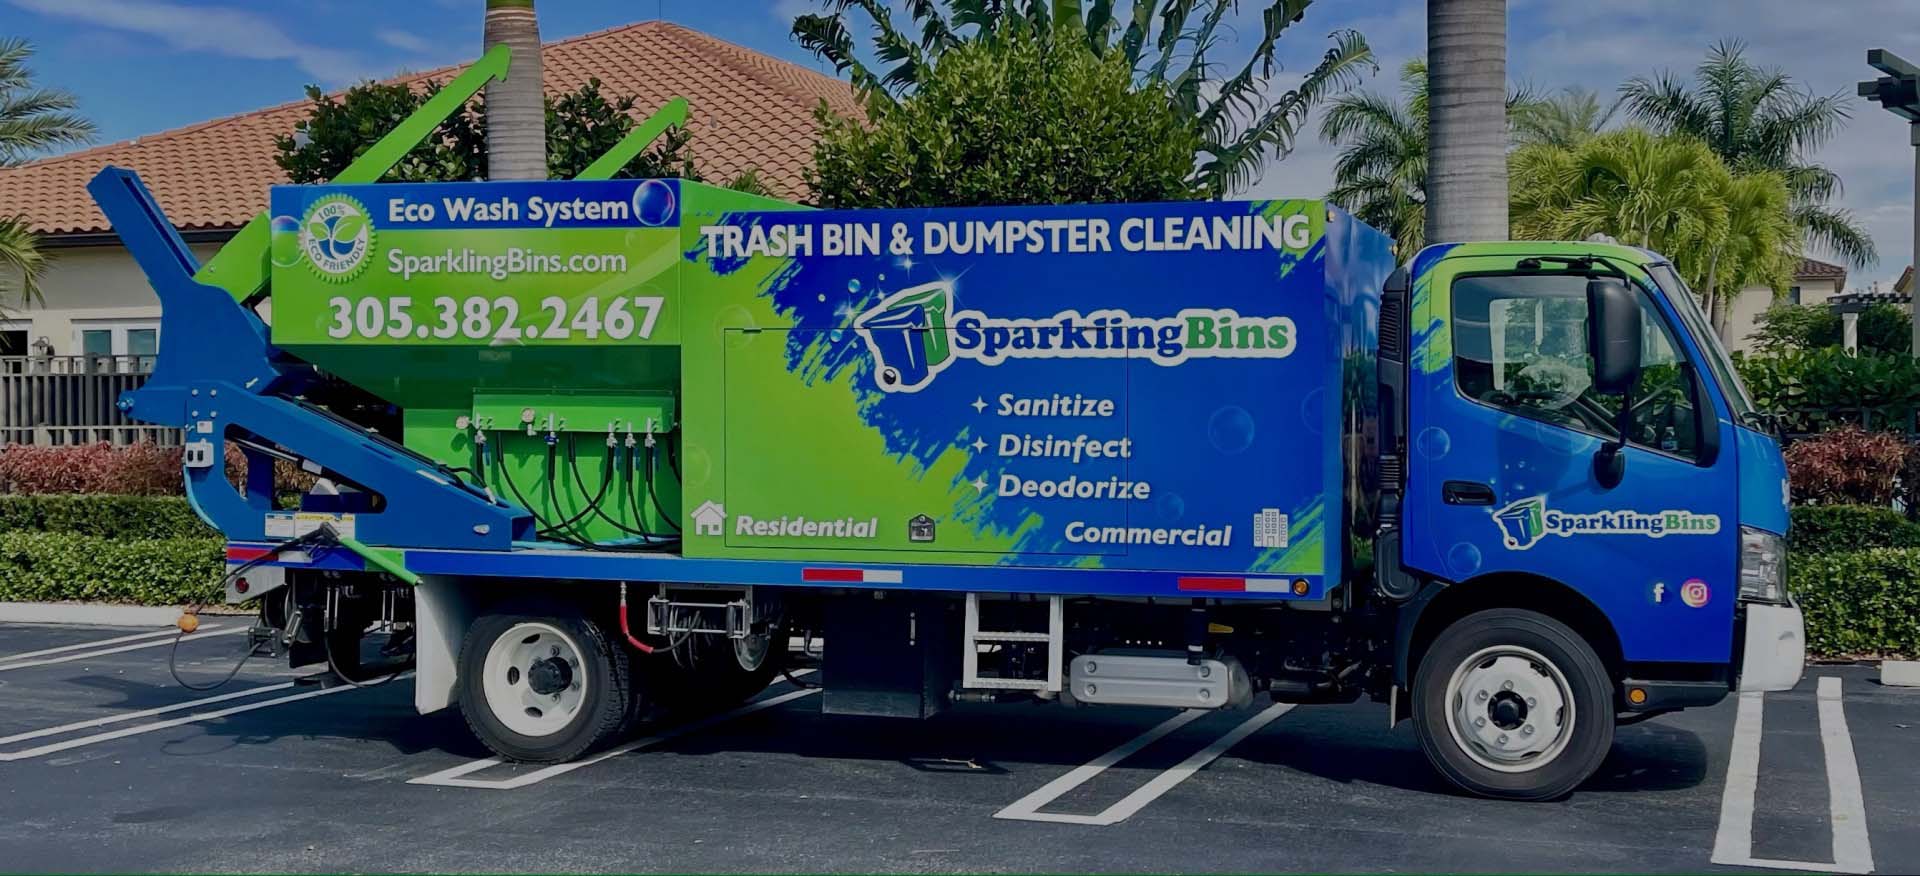 images/SPARKLING_BINS_TRASH_BIN_CLEANING_SYSTEMS.jpg